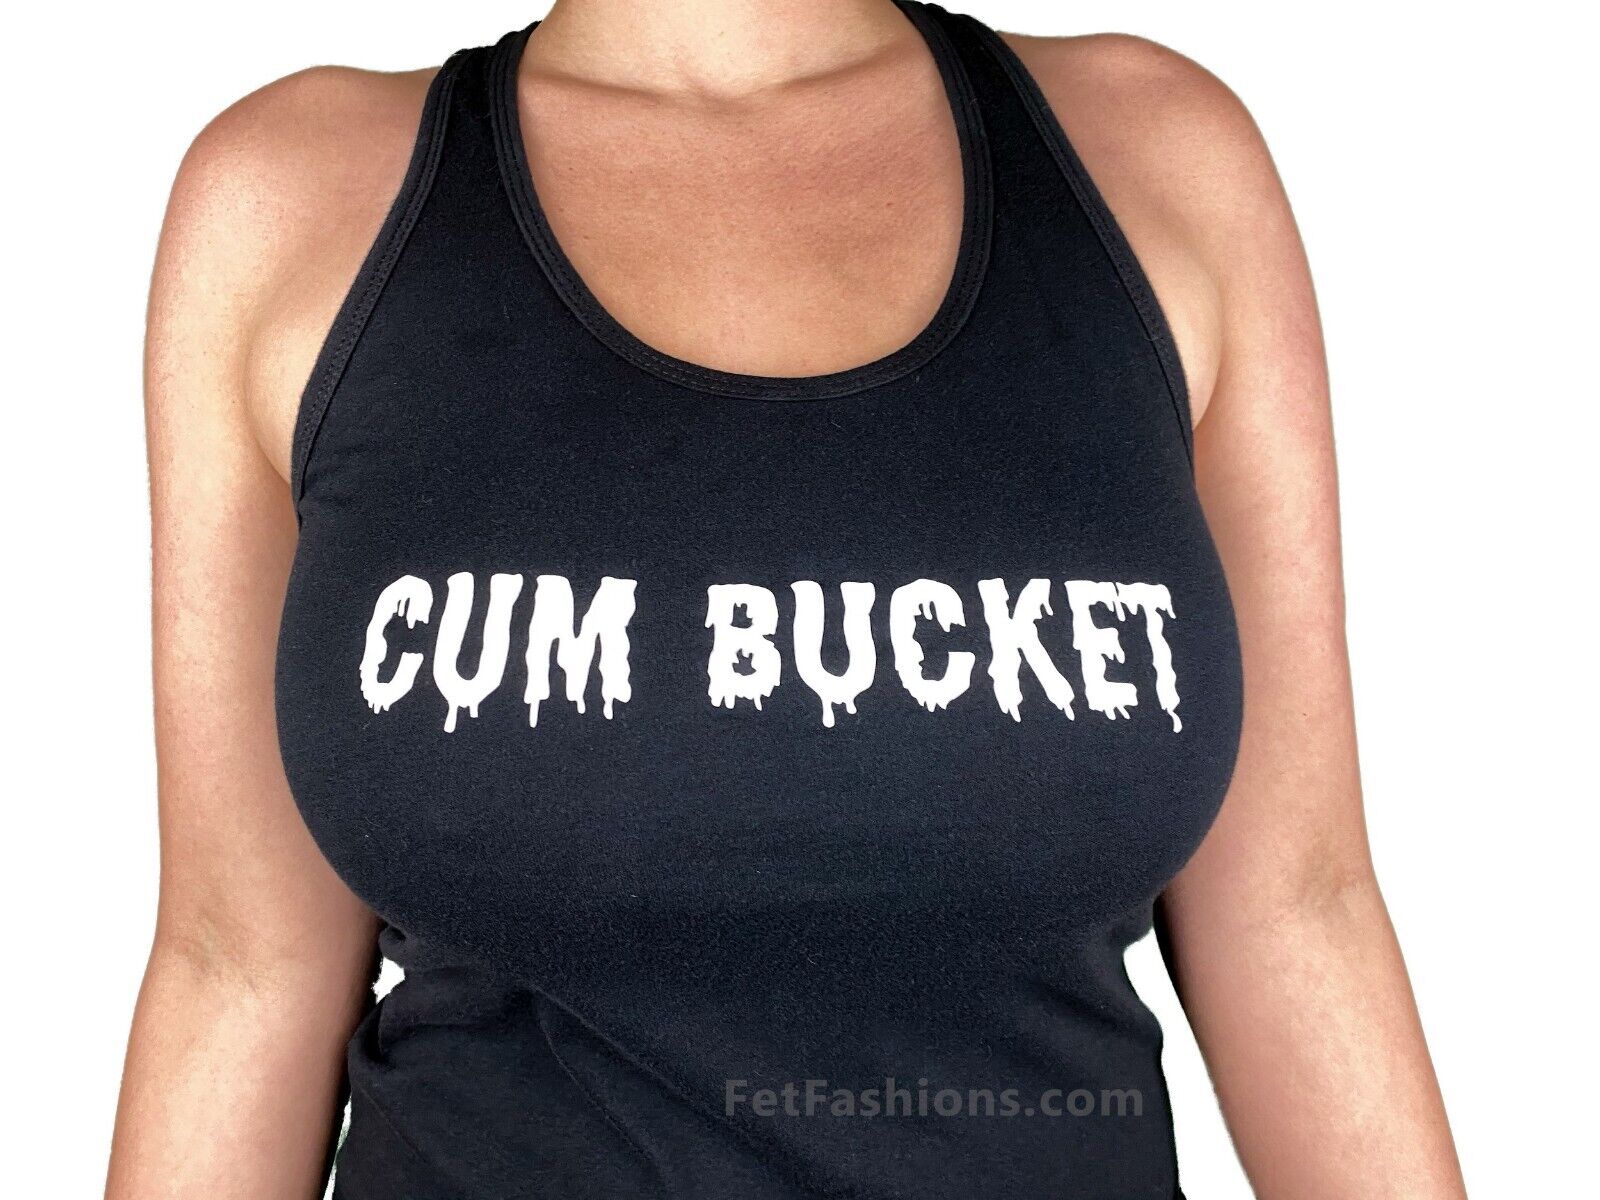 cathy pippin recommends what is a cum bucket pic